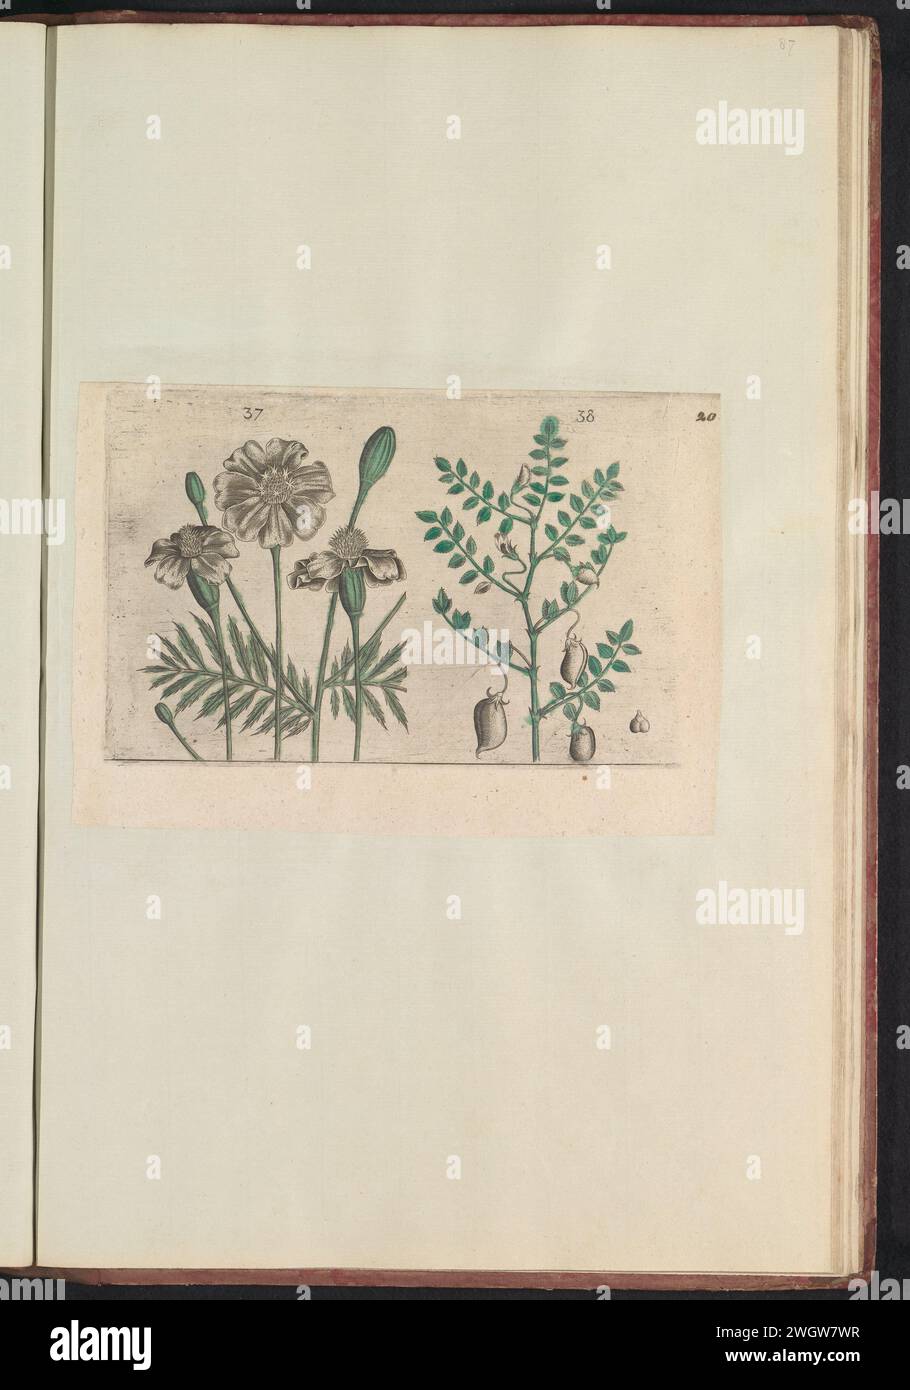 Afrikaantje (Tagetes Patula) and Chickmerwt (Cicer Arietinum), Anonymous, After Crispijn van de Passe (I), 1640 print African and chickpea. Figs. 37 and 38 on a leaf by hand numbered 20. In: Anselmi Boëtii de Boot i.c. Brugsis & Rodolphi II. Imp. Novel. Medici a Cubiculis Florum, Herbarum, AC Fructuum Selectiorum Icones, & Vires Pleraque Hacttenus Ignotæ. Part of the album with magazines and plates from the Boodts Herbarium of 1640. The twelfth of twelve albums with watercolors of animals, birds and plants known around 1600, commissioned by Emperor Rudolf II. print maker: Southern Netherlandsa Stock Photo